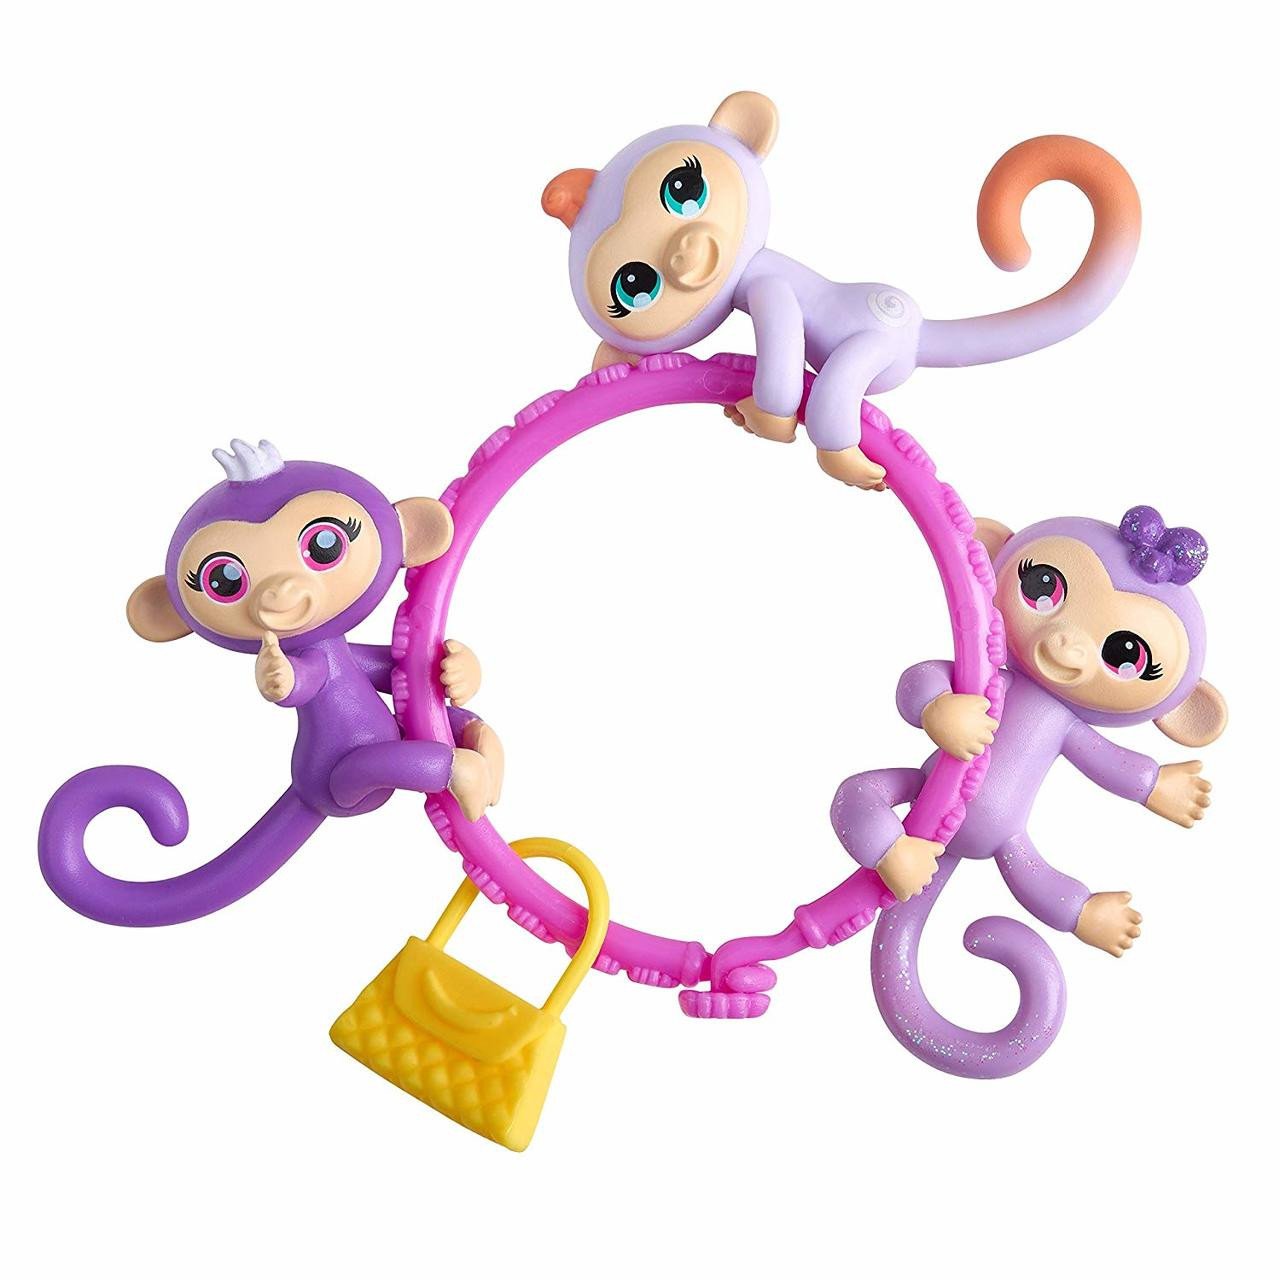 Fingerlings Minis Series 1 - 3 Pack - Buy at Not Just Toyz